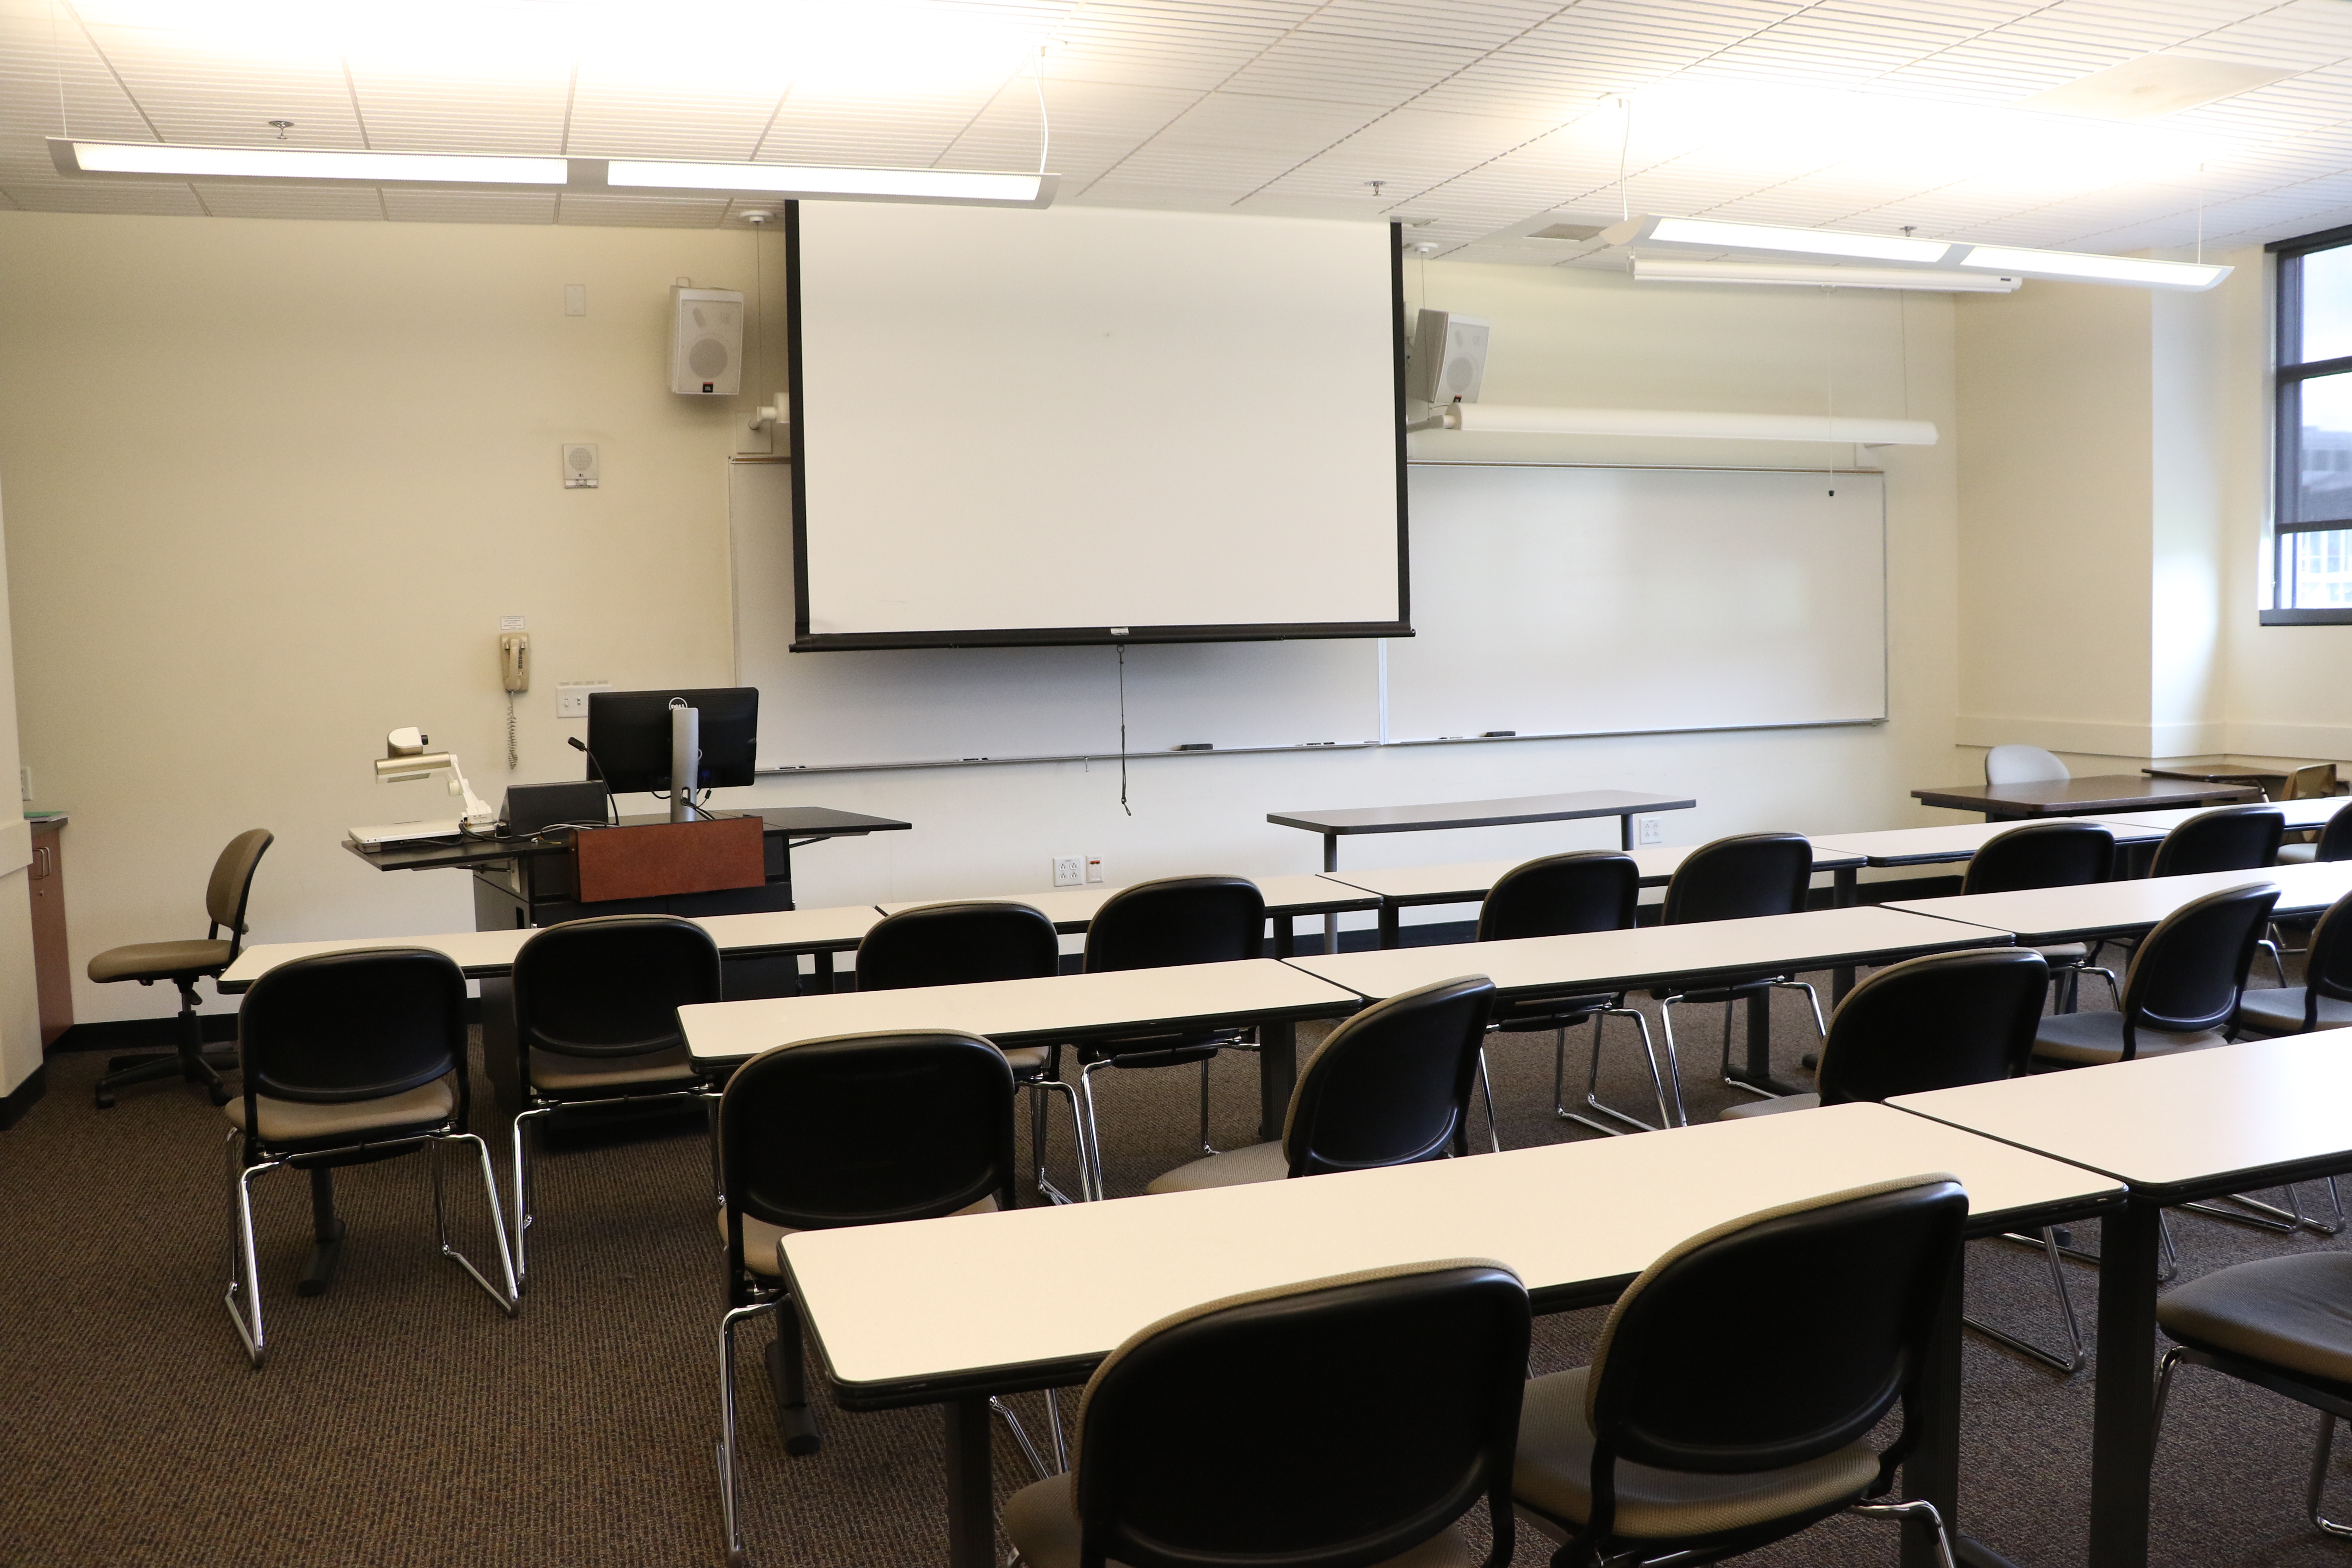 Room consists of carpet, moveable tables and chairs, another table at the front of the room, podium and whiteboard located at the front of the room. 